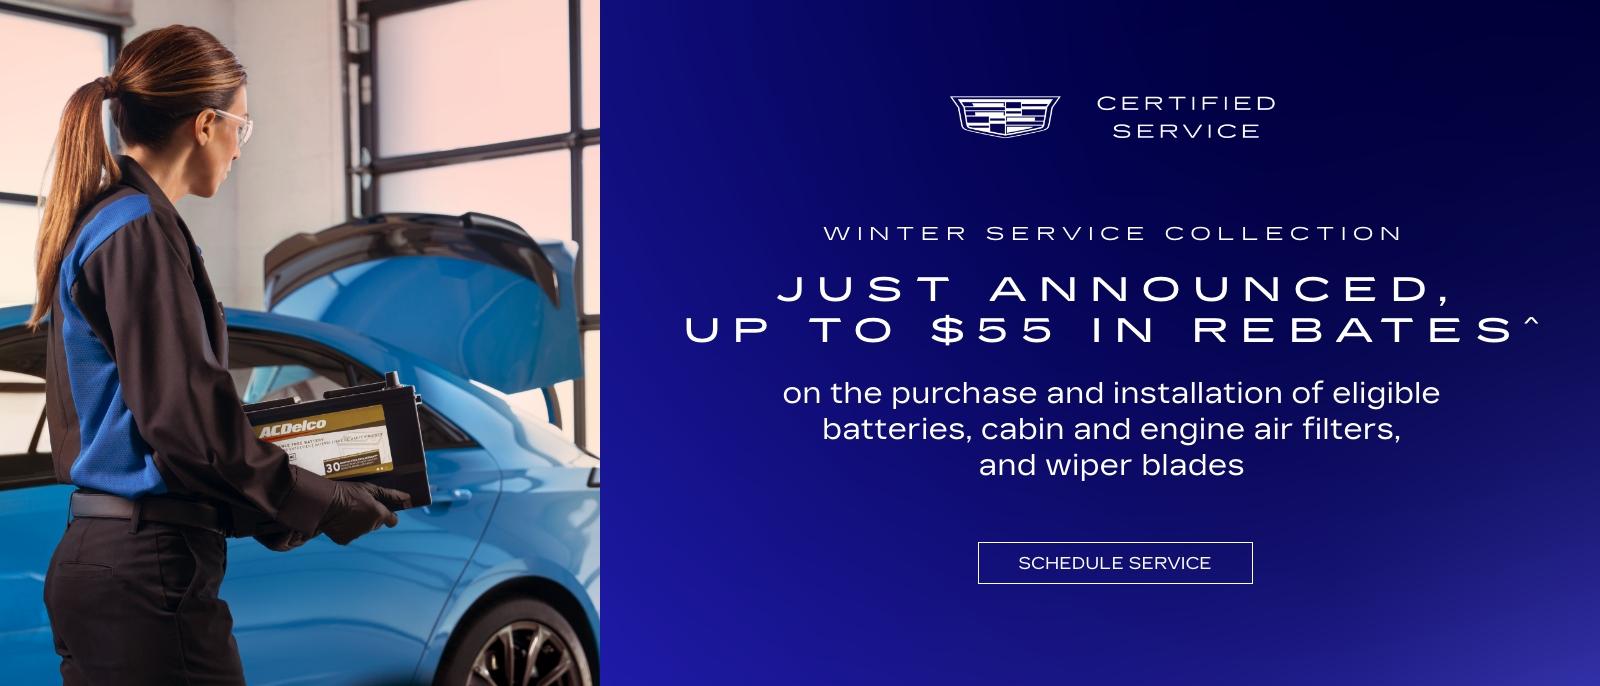 JUST ANNOUNCED, UP TO $55 IN REBATES.